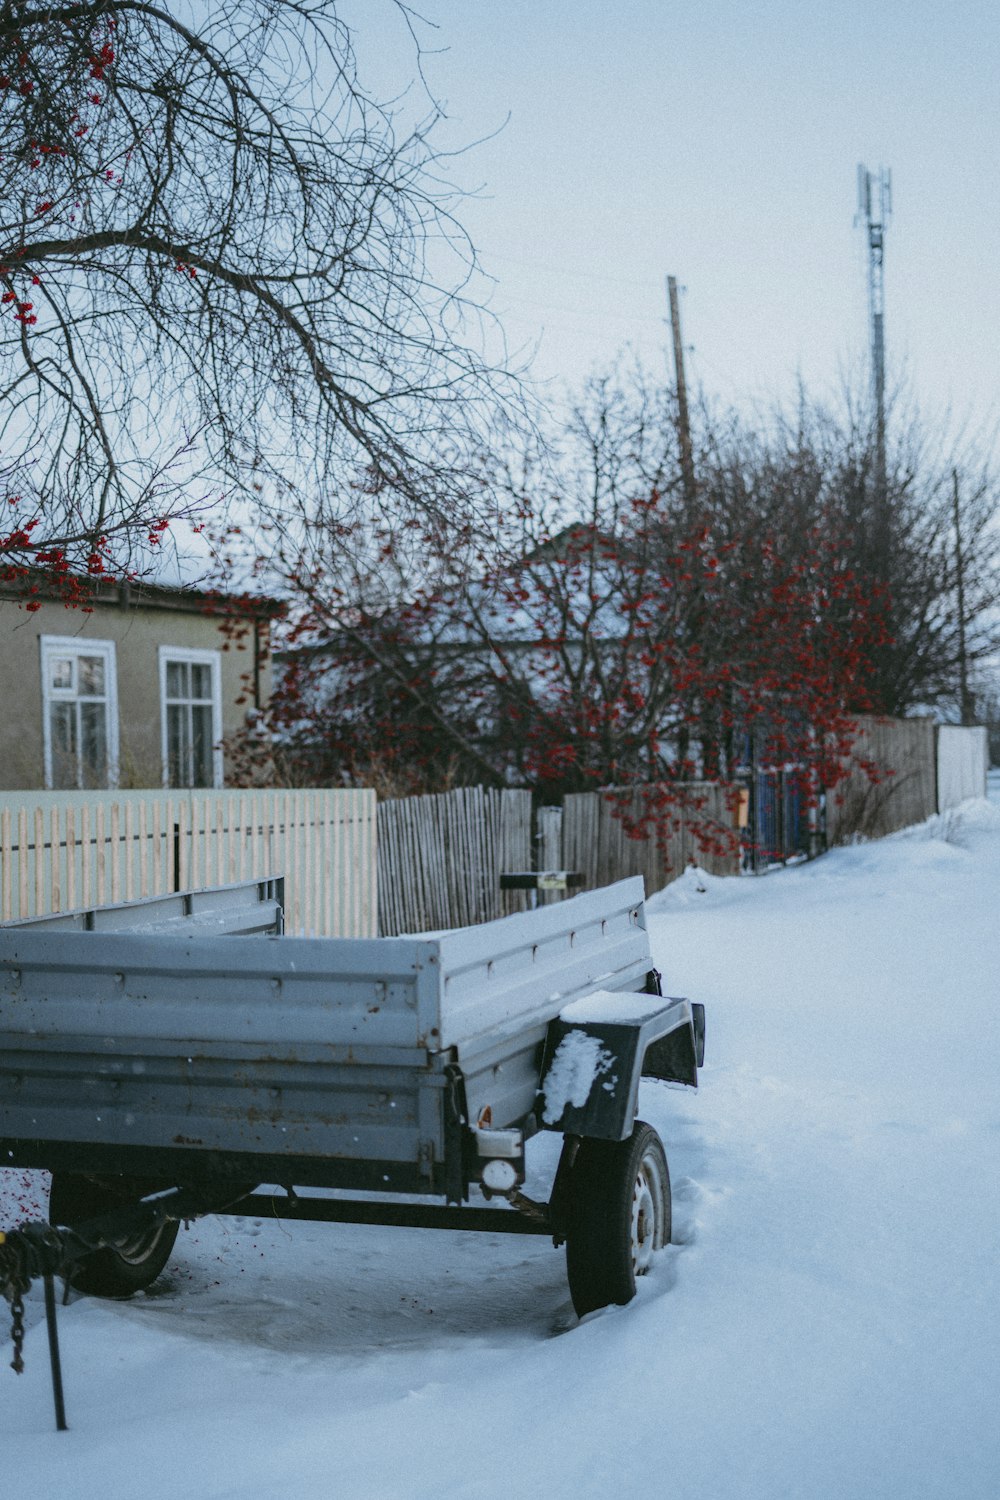 a truck is parked in the snow near a fence